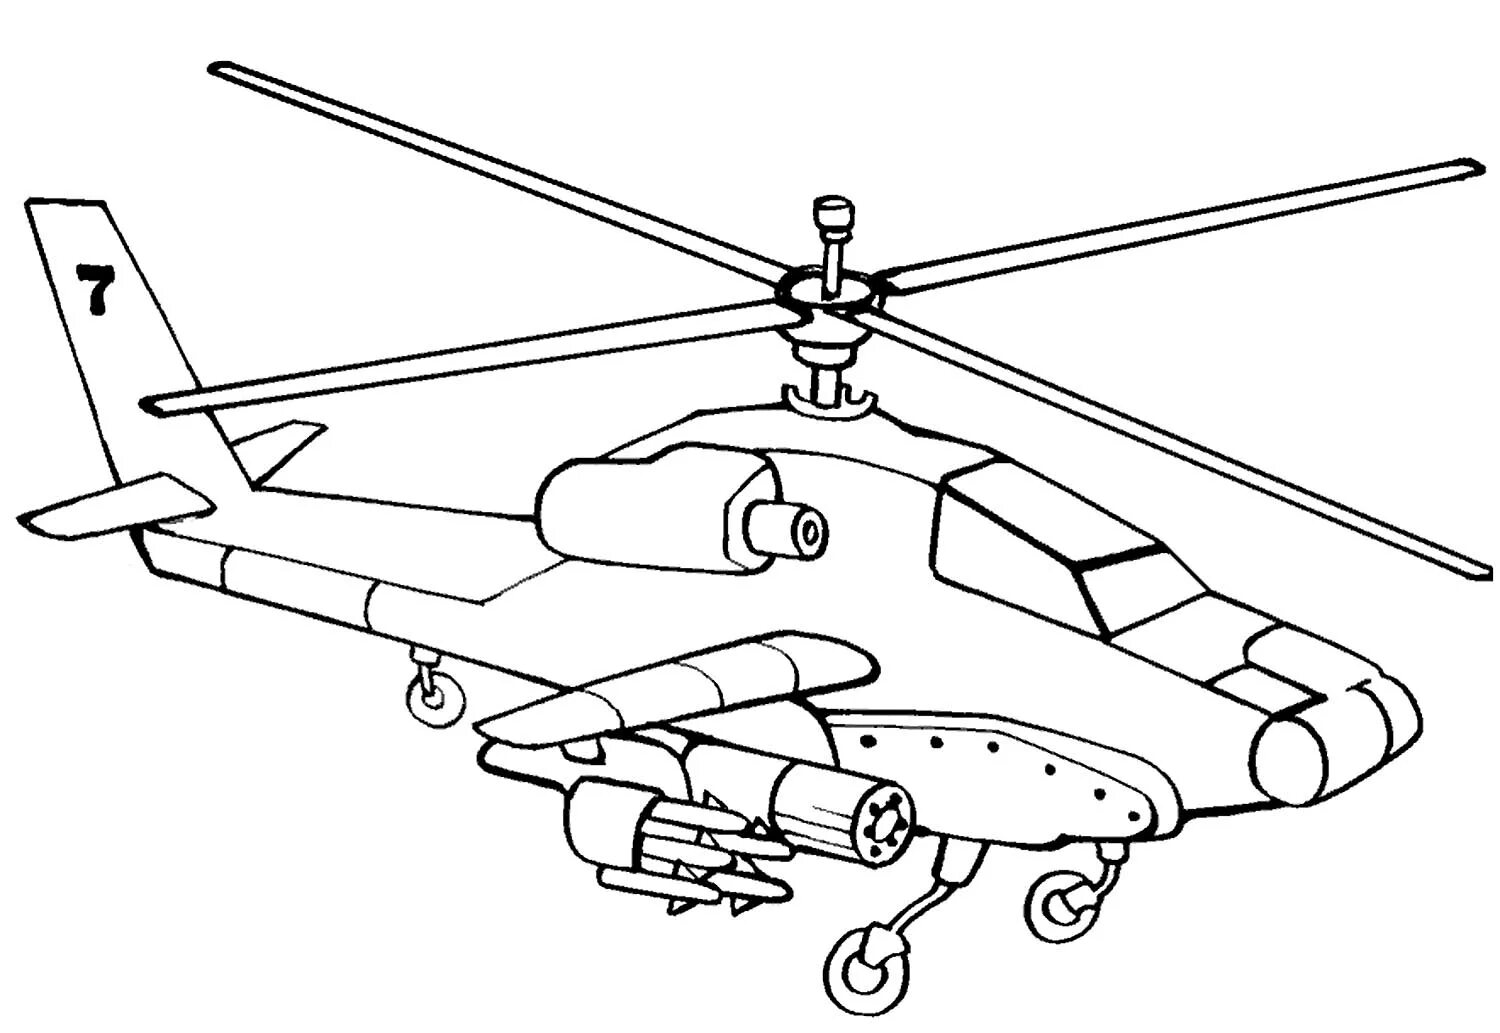 Gorgeous Russian military equipment coloring book for preschoolers